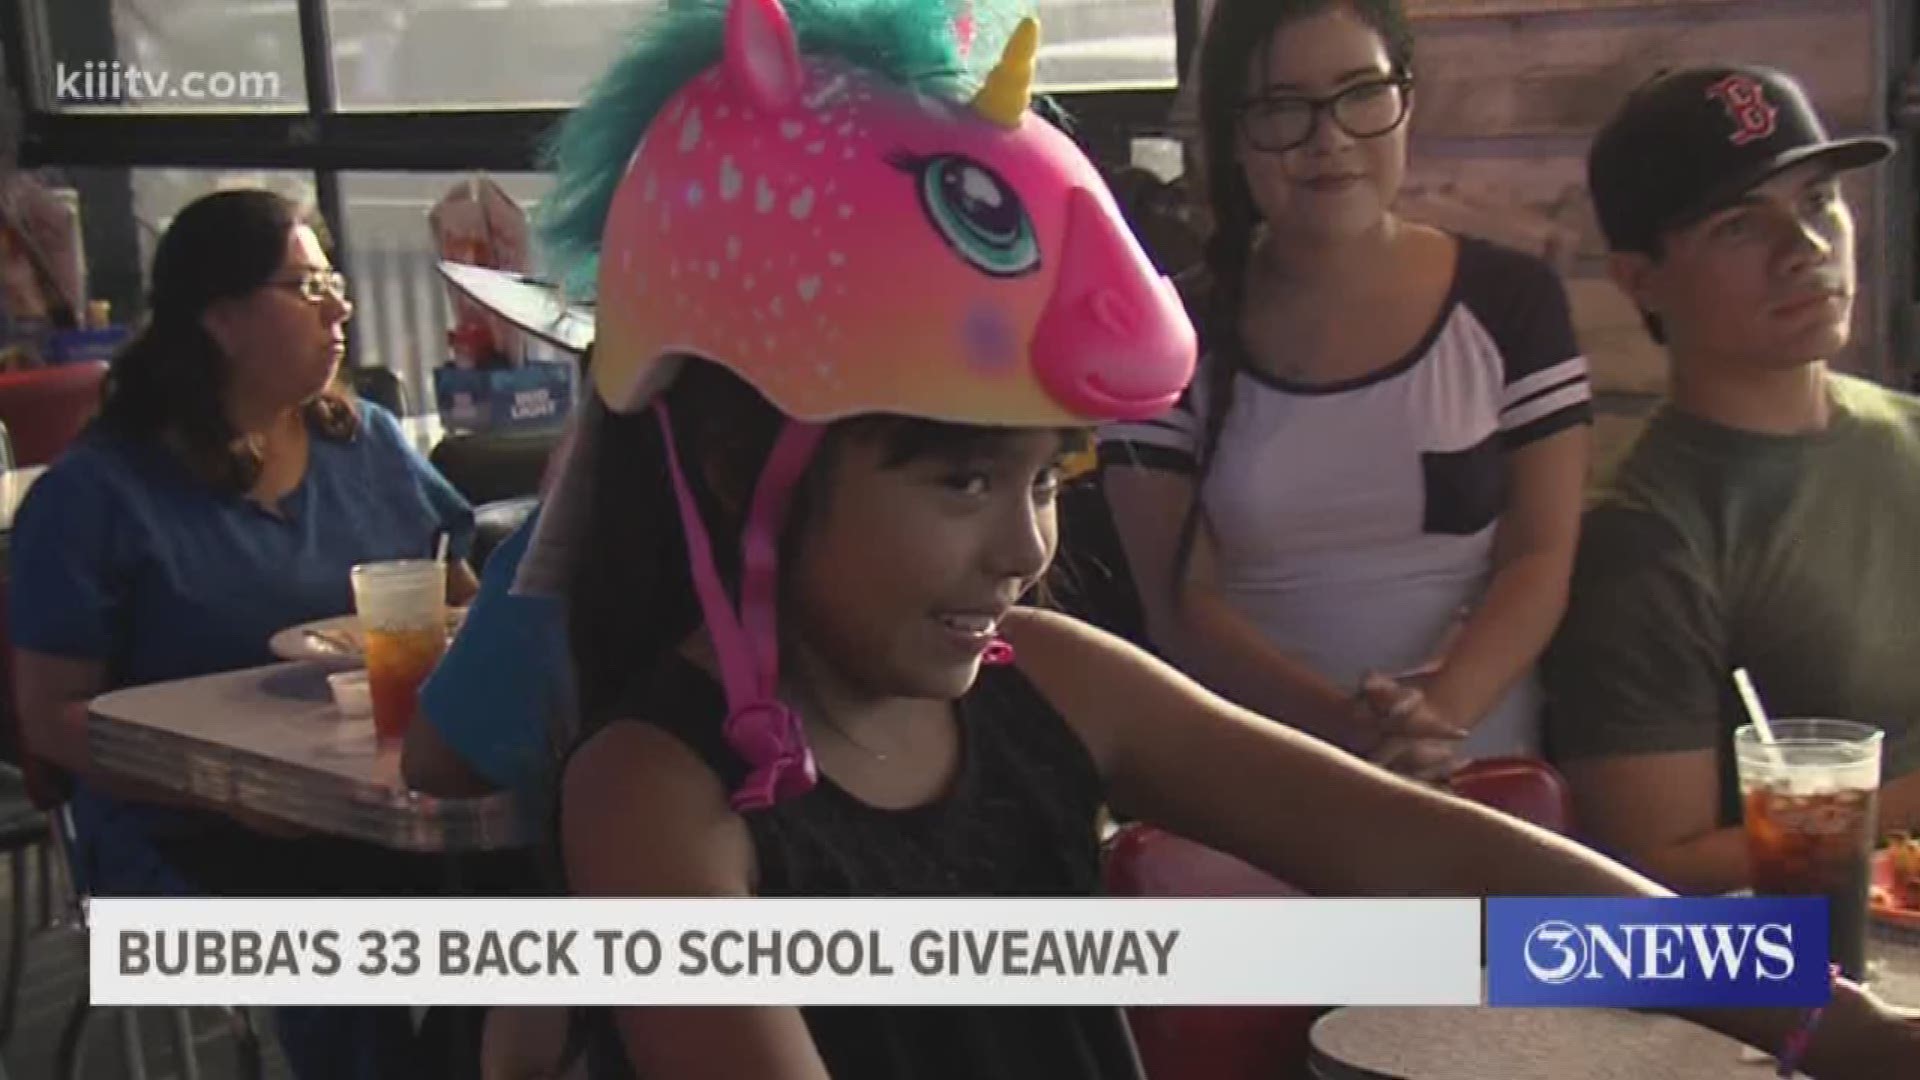 A restaurant chain is making sure local kids have everything they need to go back to school.